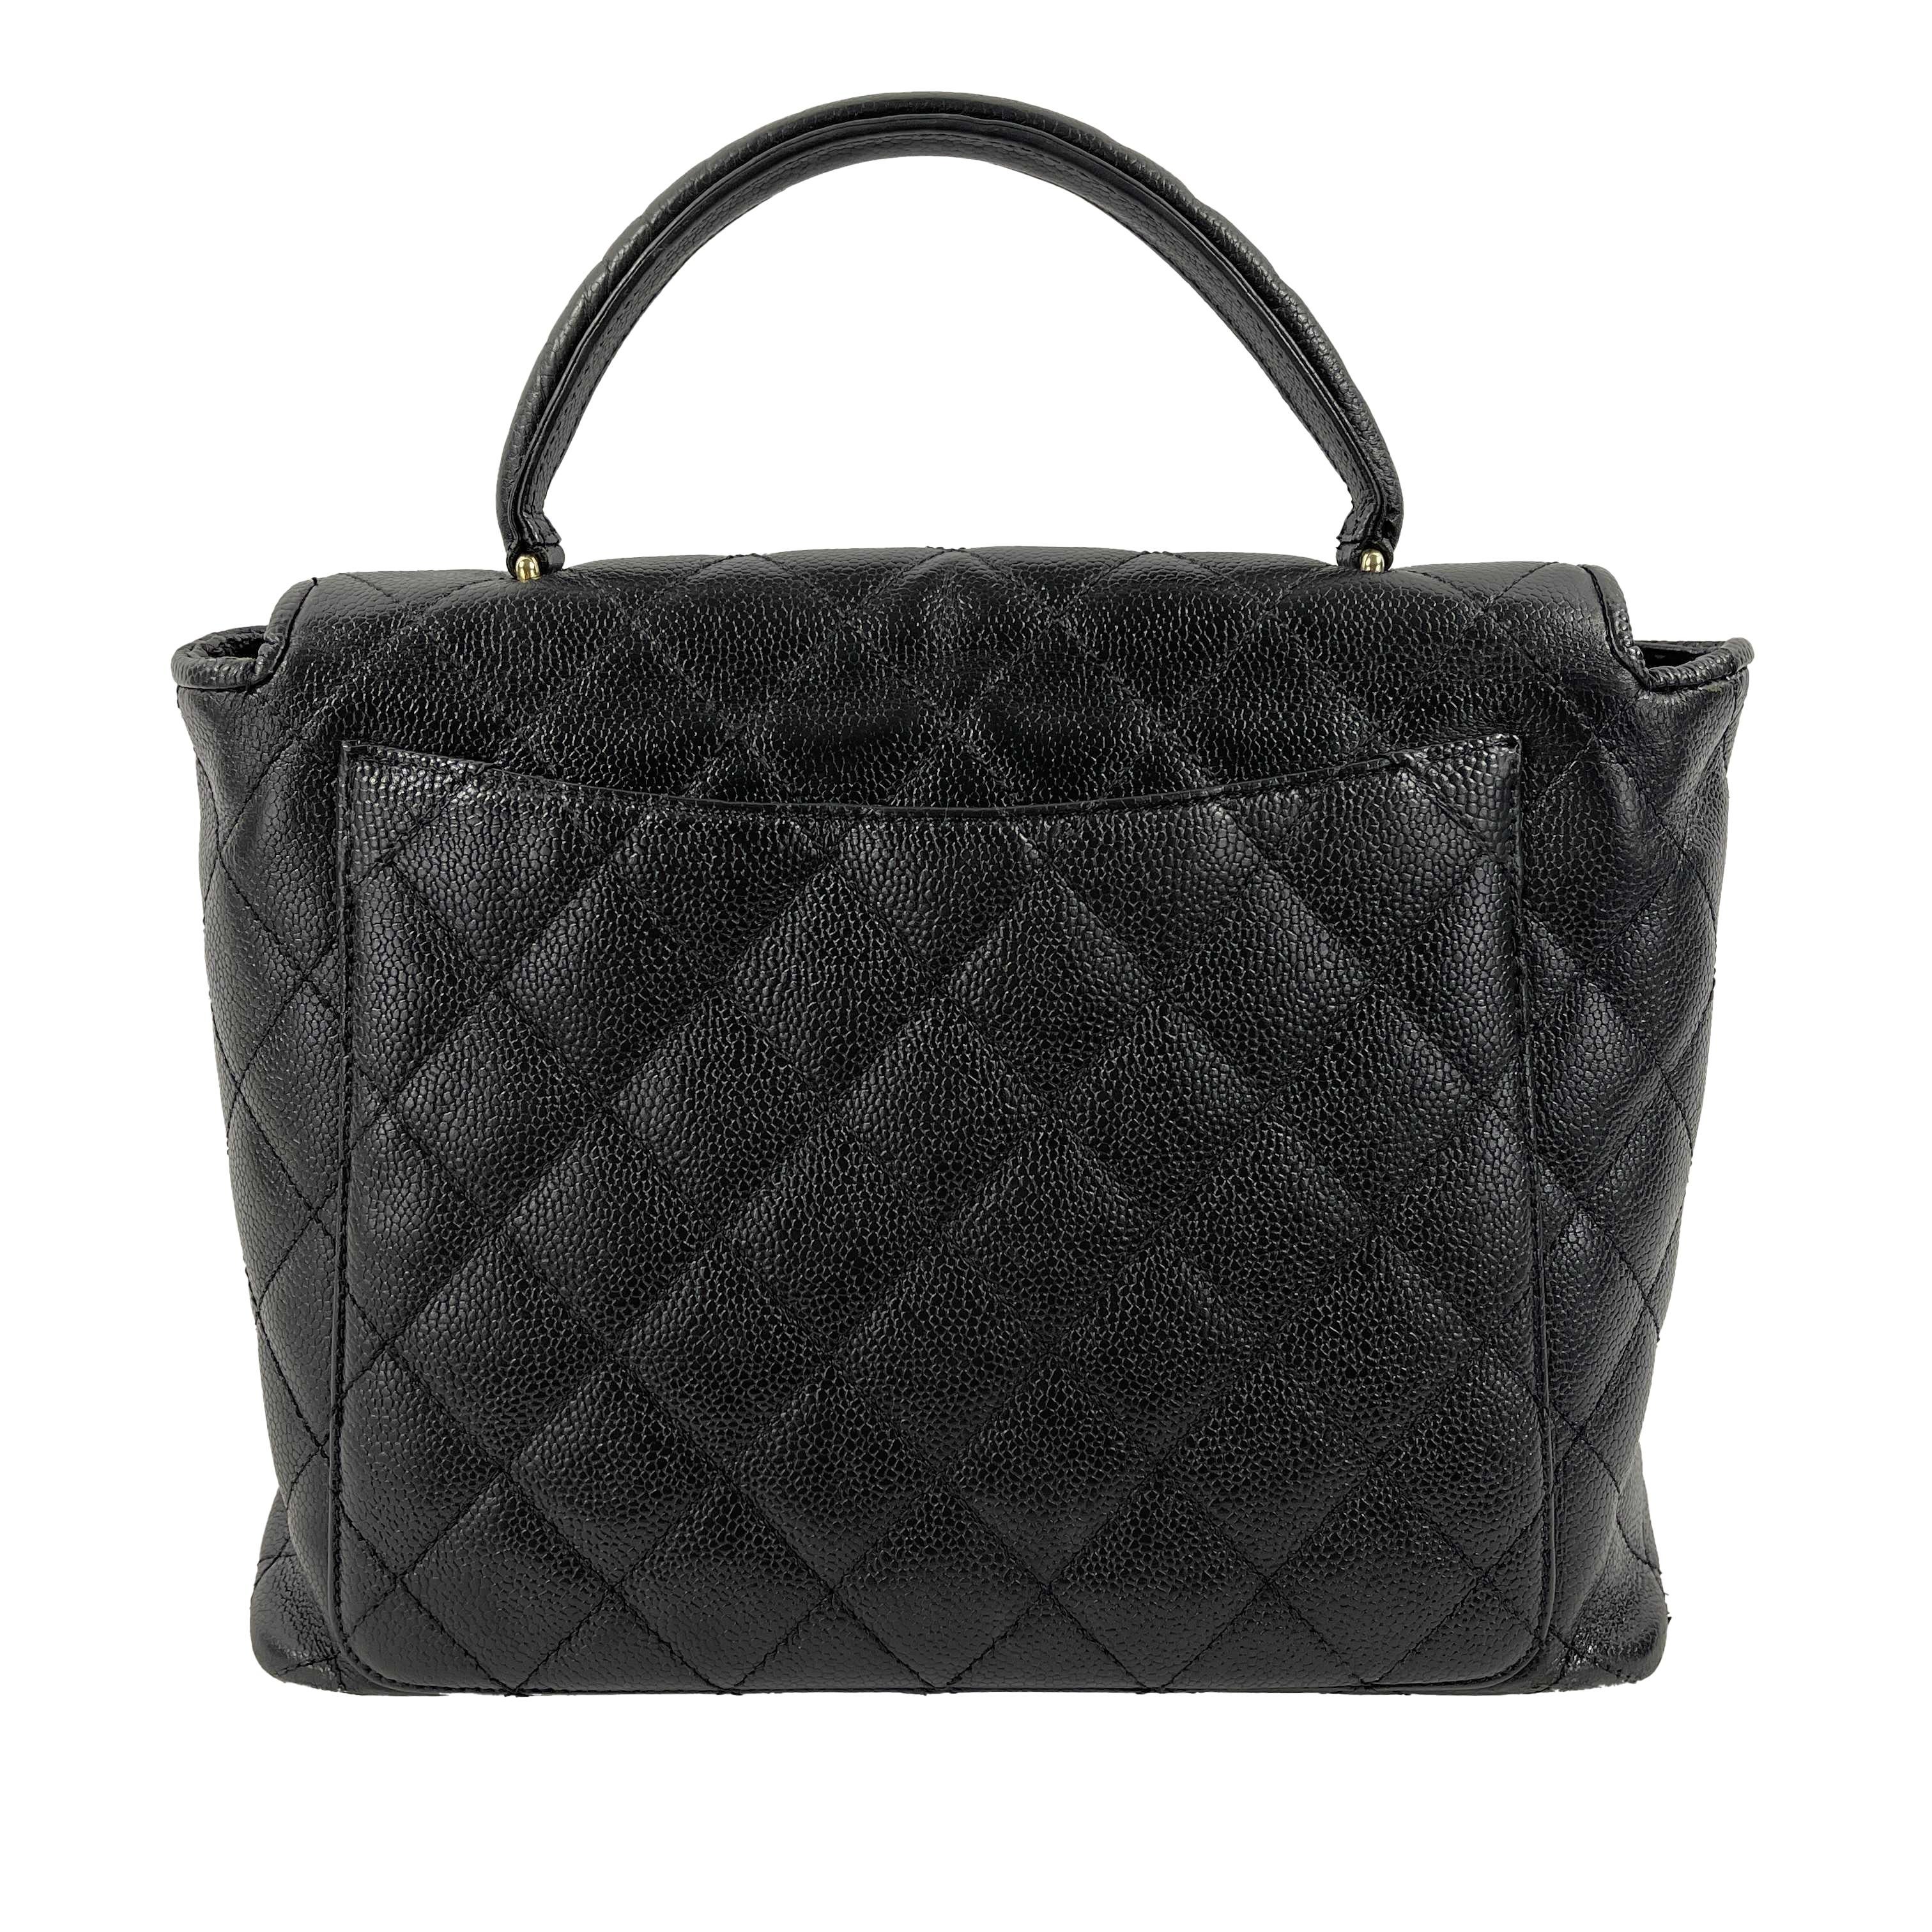 CHANEL - Excellent - Vintage Large Kelly Caviar Top Handle Flap CC - Black - Handbag

Description

Early 1980s vintage- no date stamps were made in this time period.
Top handle Kelly style in quilted caviar black leather.
Matching leather interior